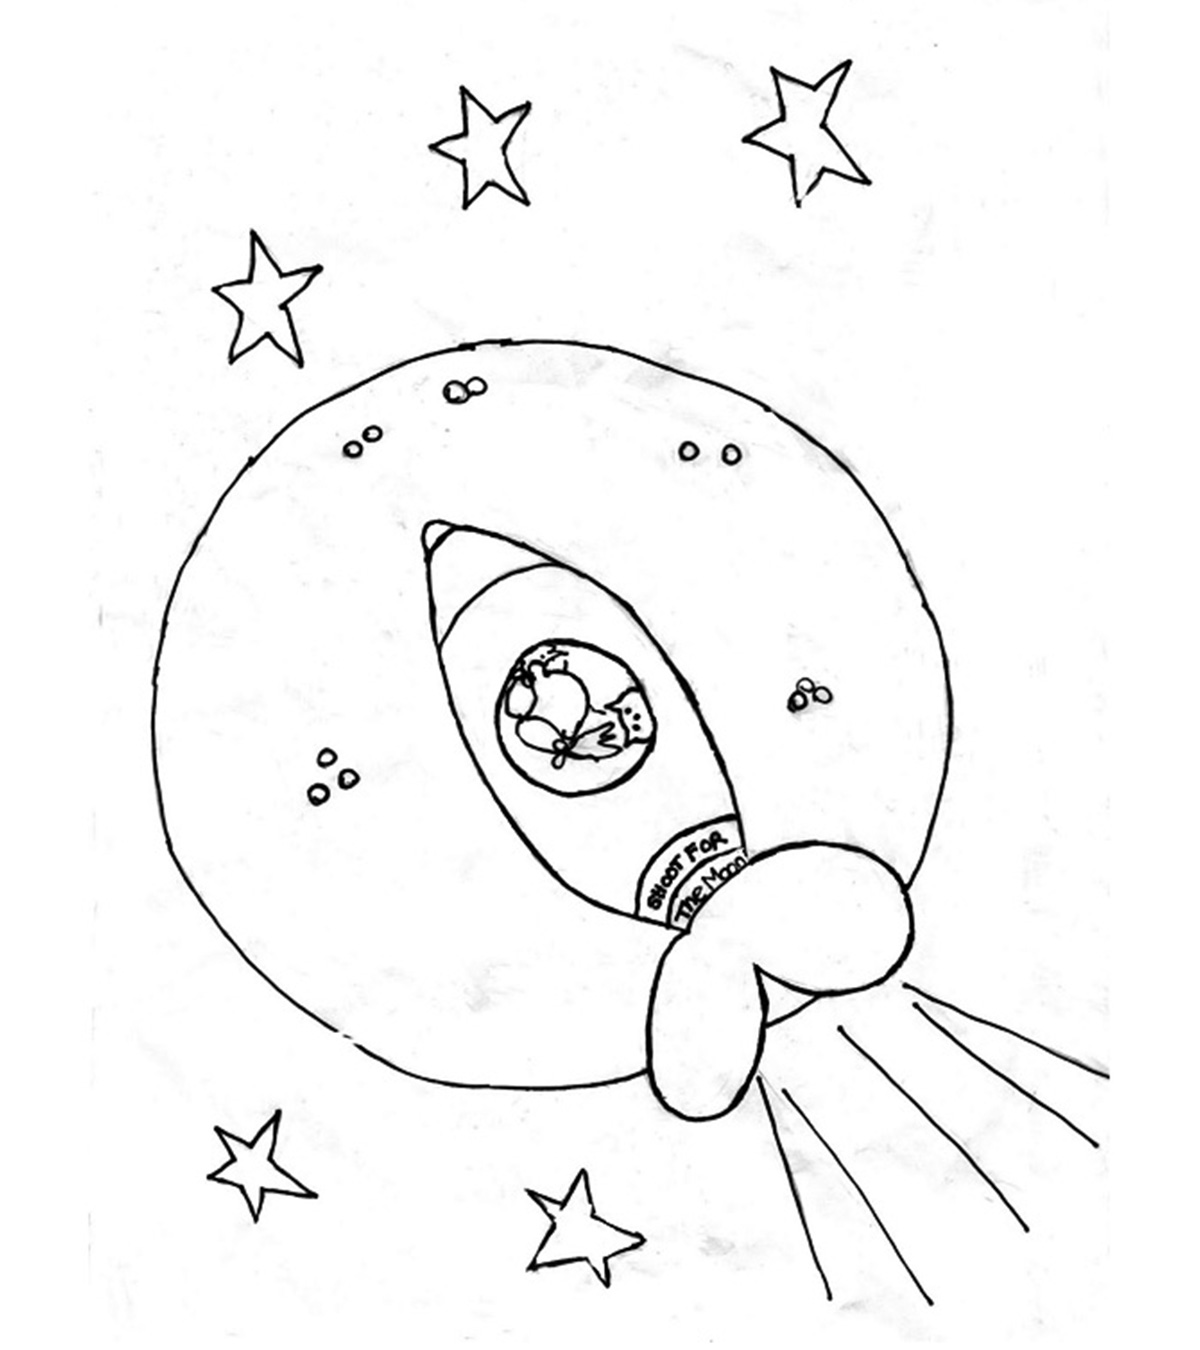 Top 10 Moon Coloring Pages For Your Toddler_image